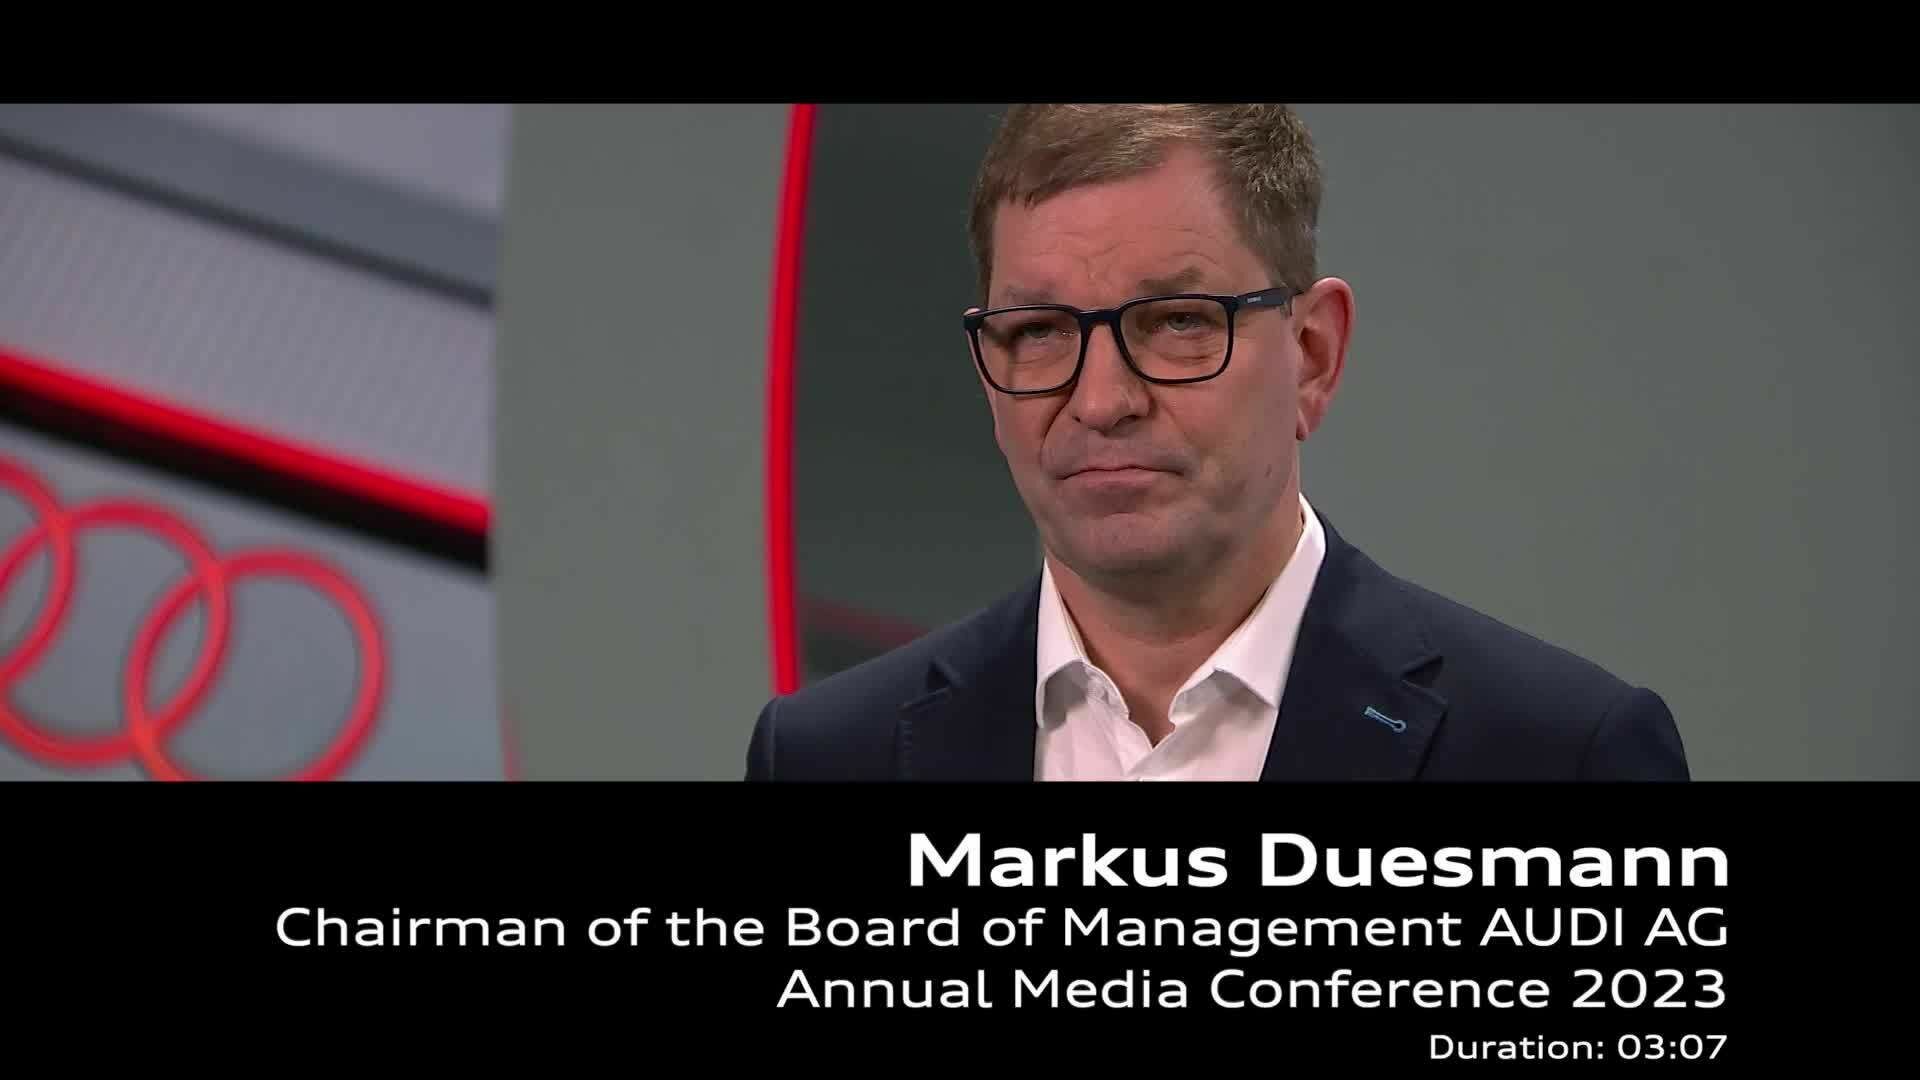 Footage: Statement from Markus Duesmann at the Audi Annual Media Conference 2023